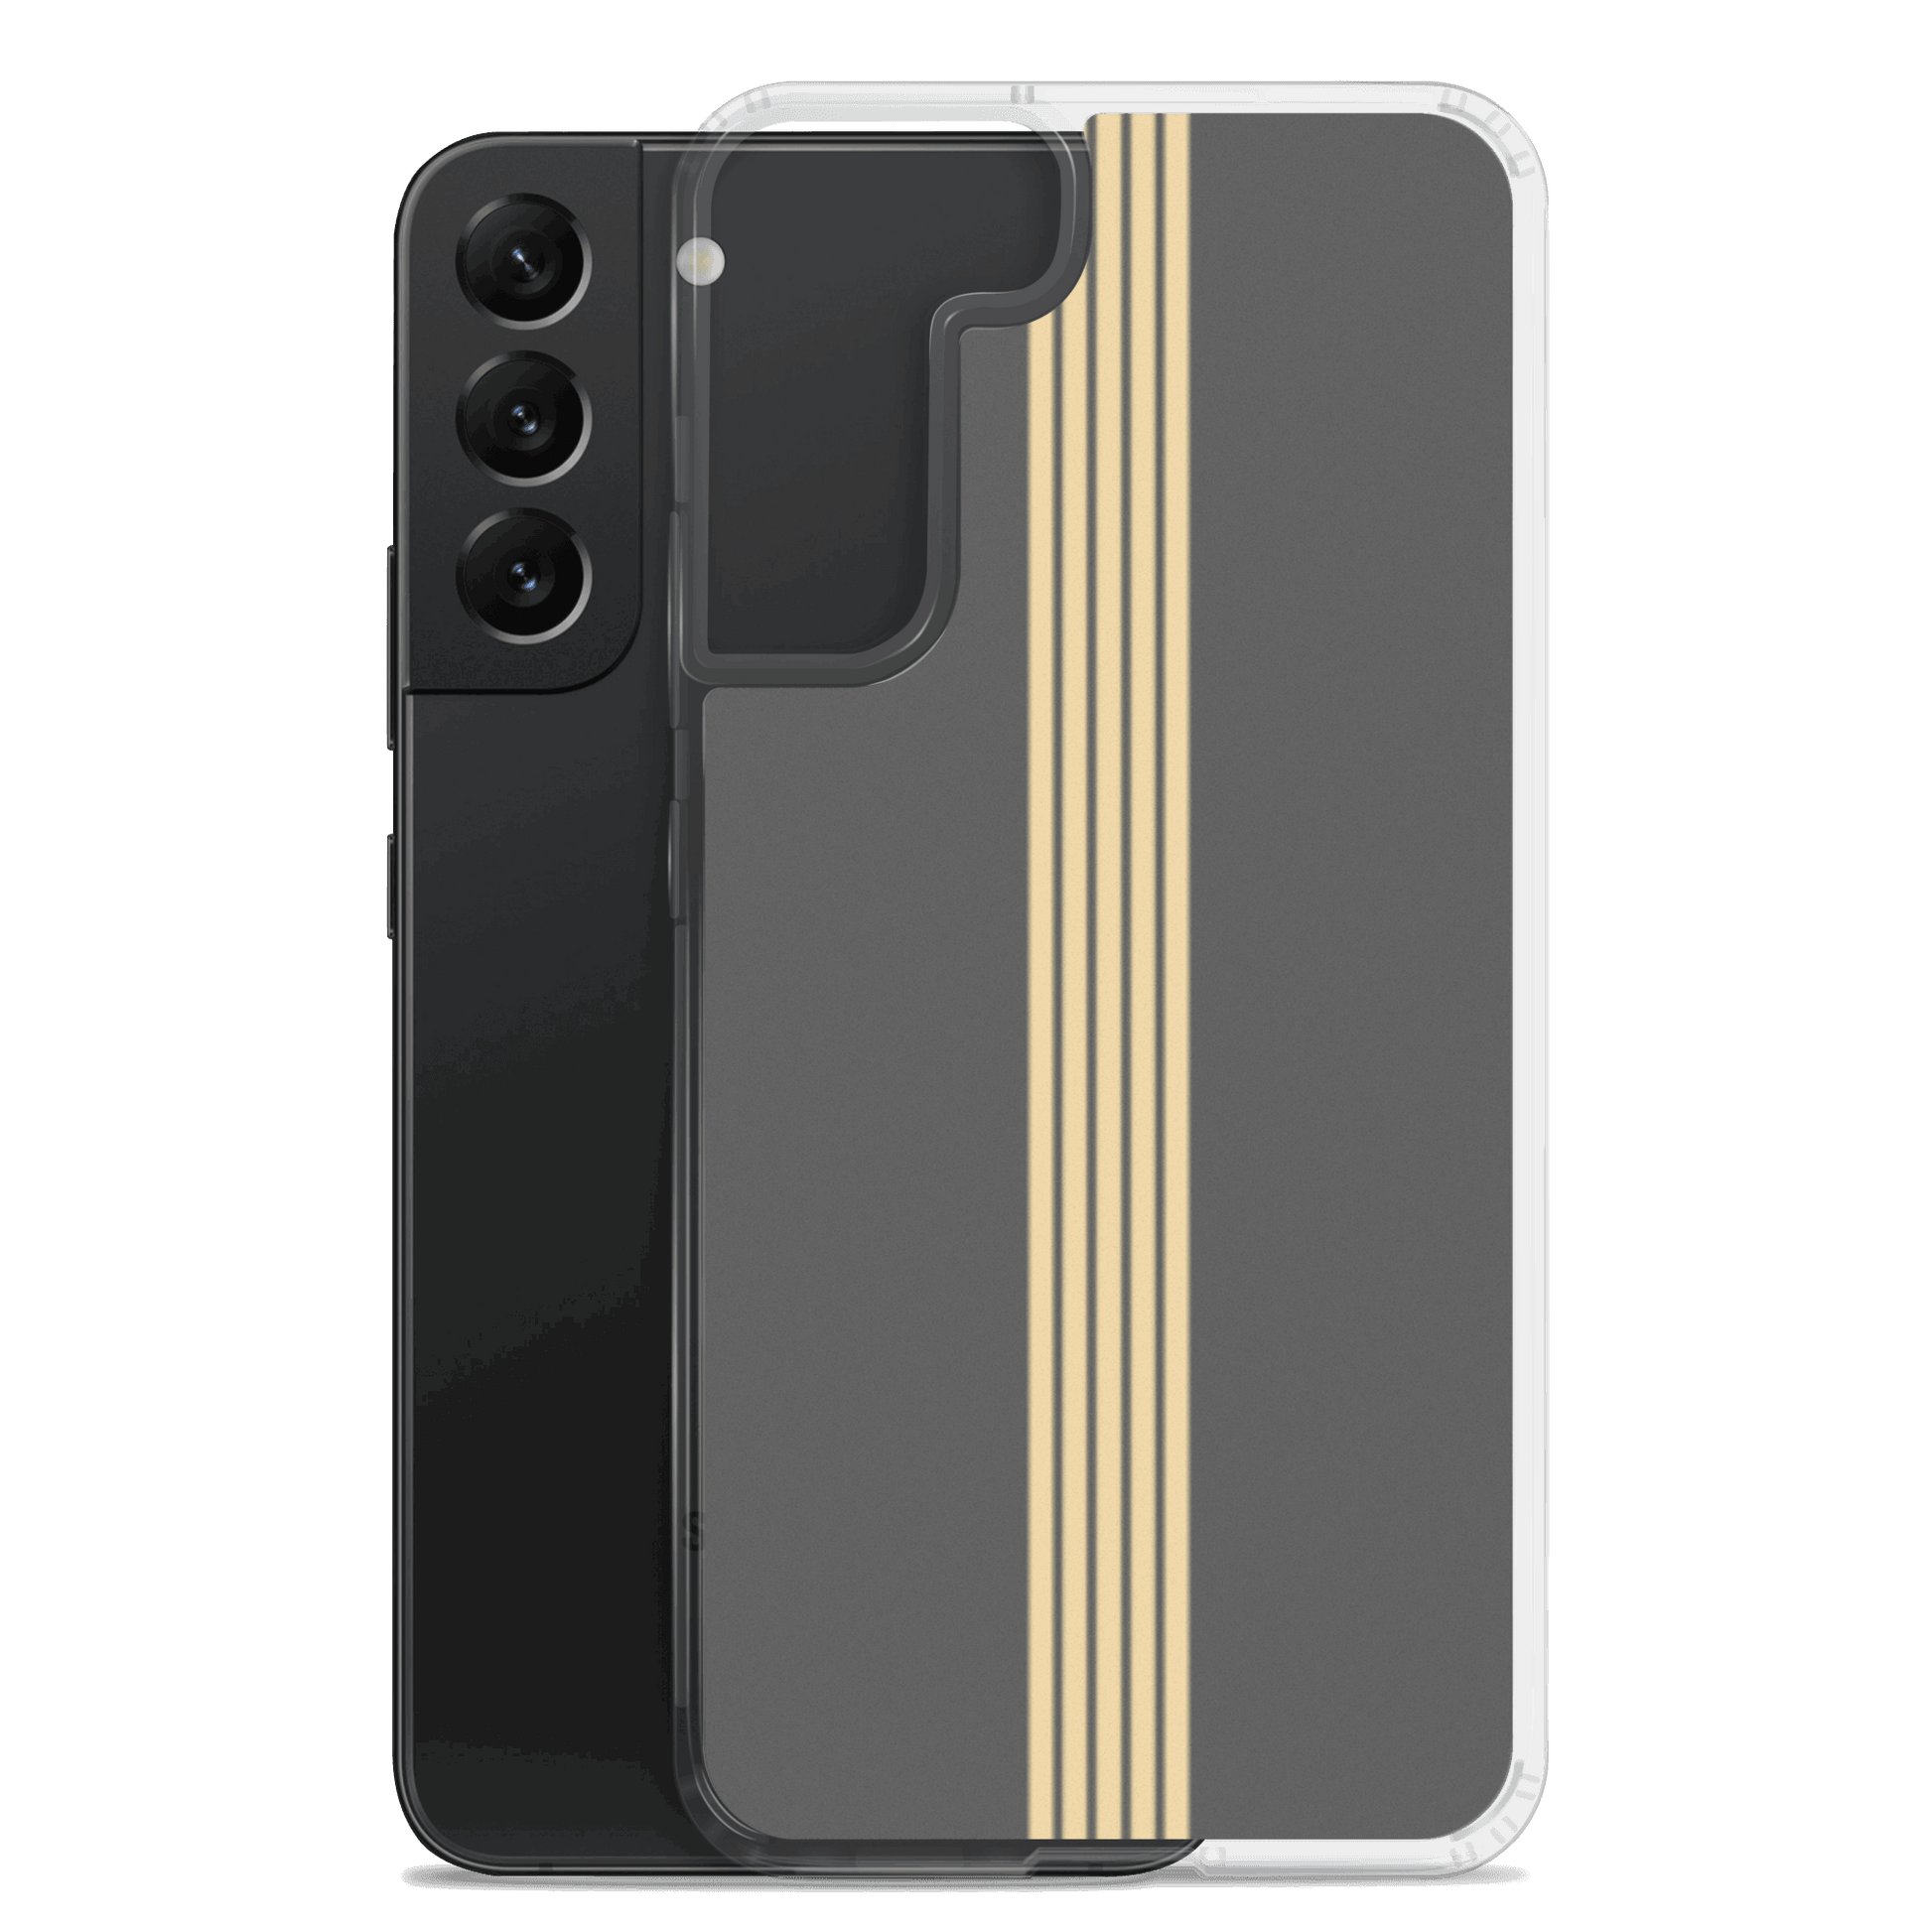 Classic Cool Grey with Gold Stripes - Samsung Scratch-Resistant Clear Phone Case DrawDadDraw